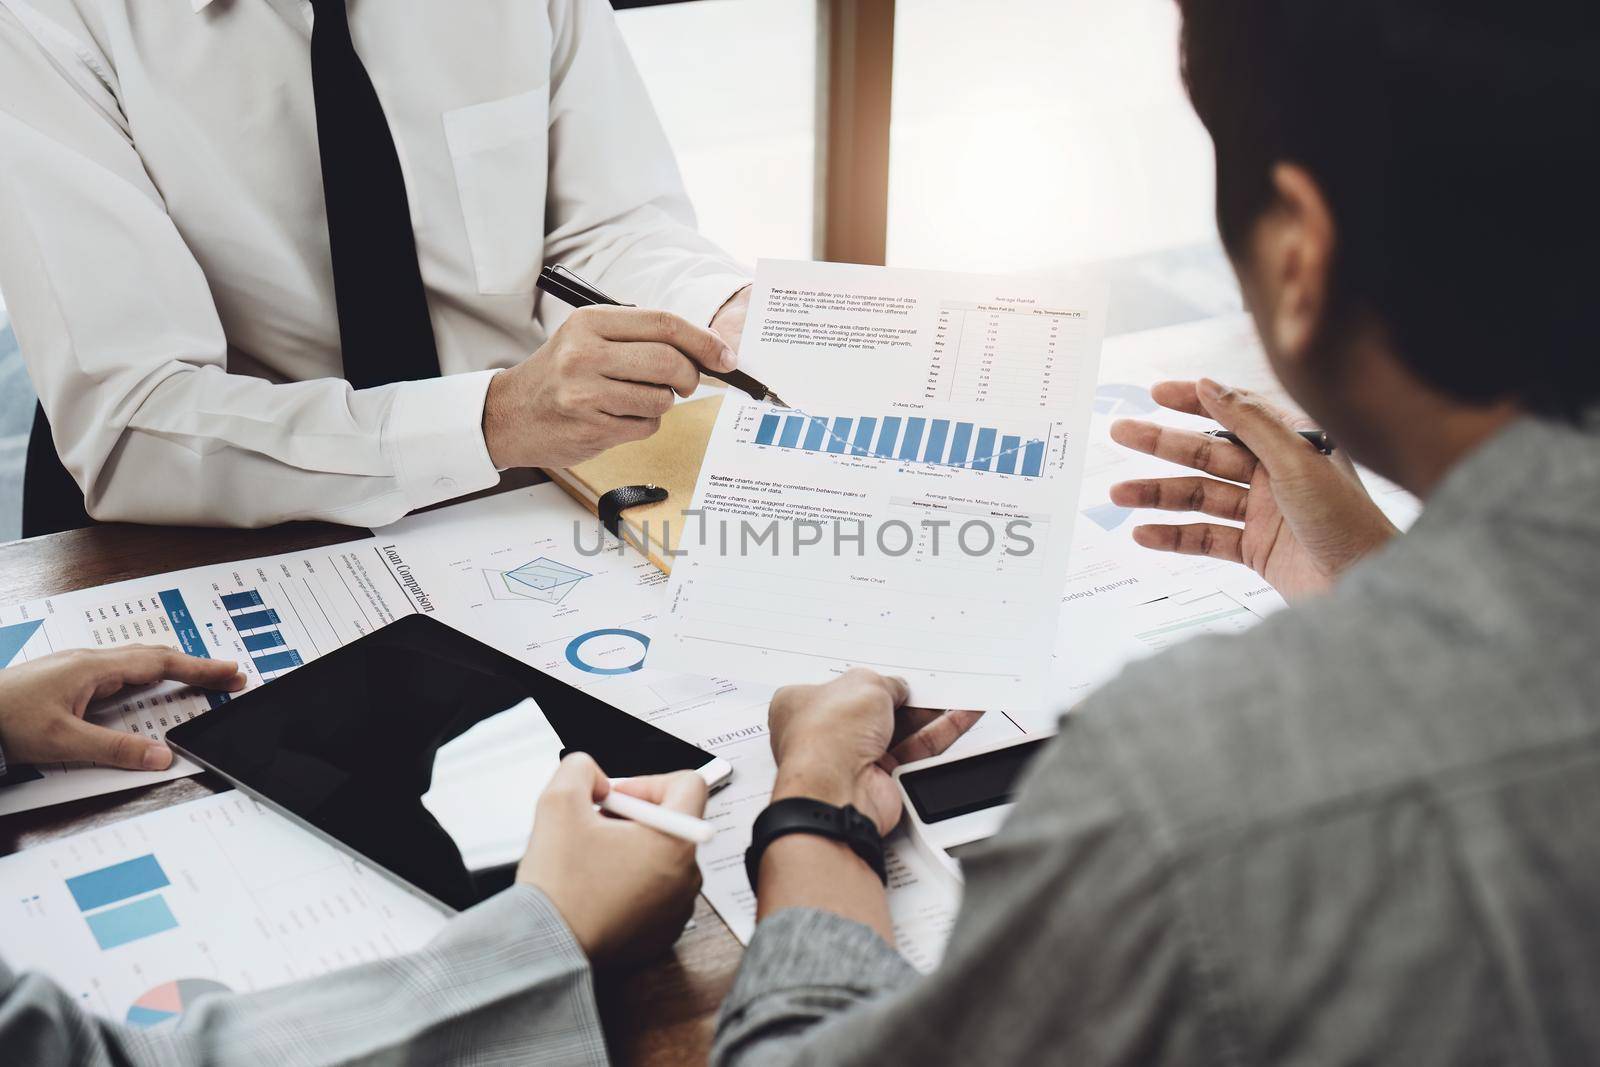 Planning to reduce investment risks, the image of a group of businesspeople working with partners is adjusting marketing strategies to analyze profitable and targeted customer needs at meetings..